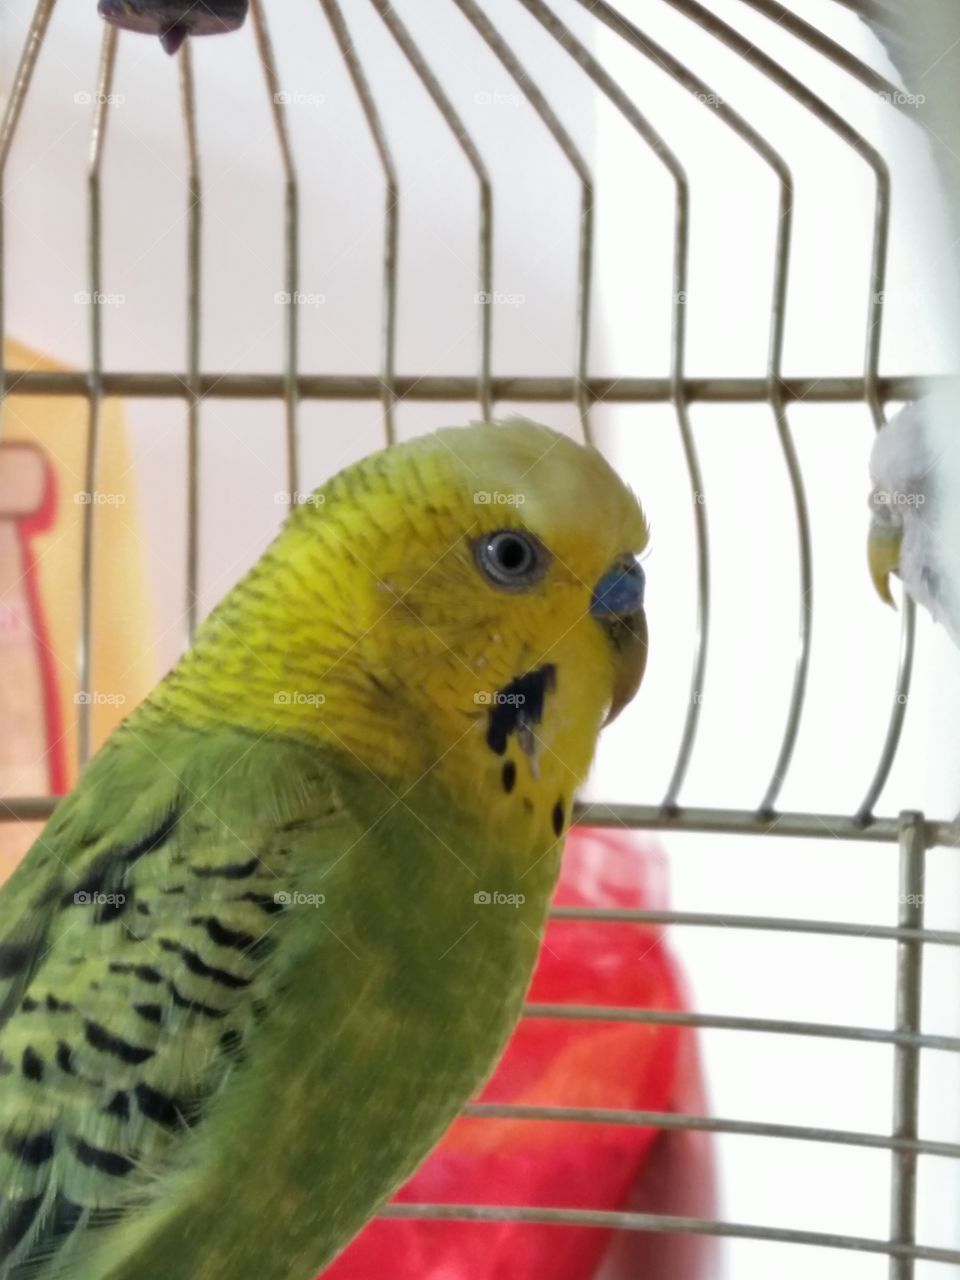 A little parrot Looking curious from the cage